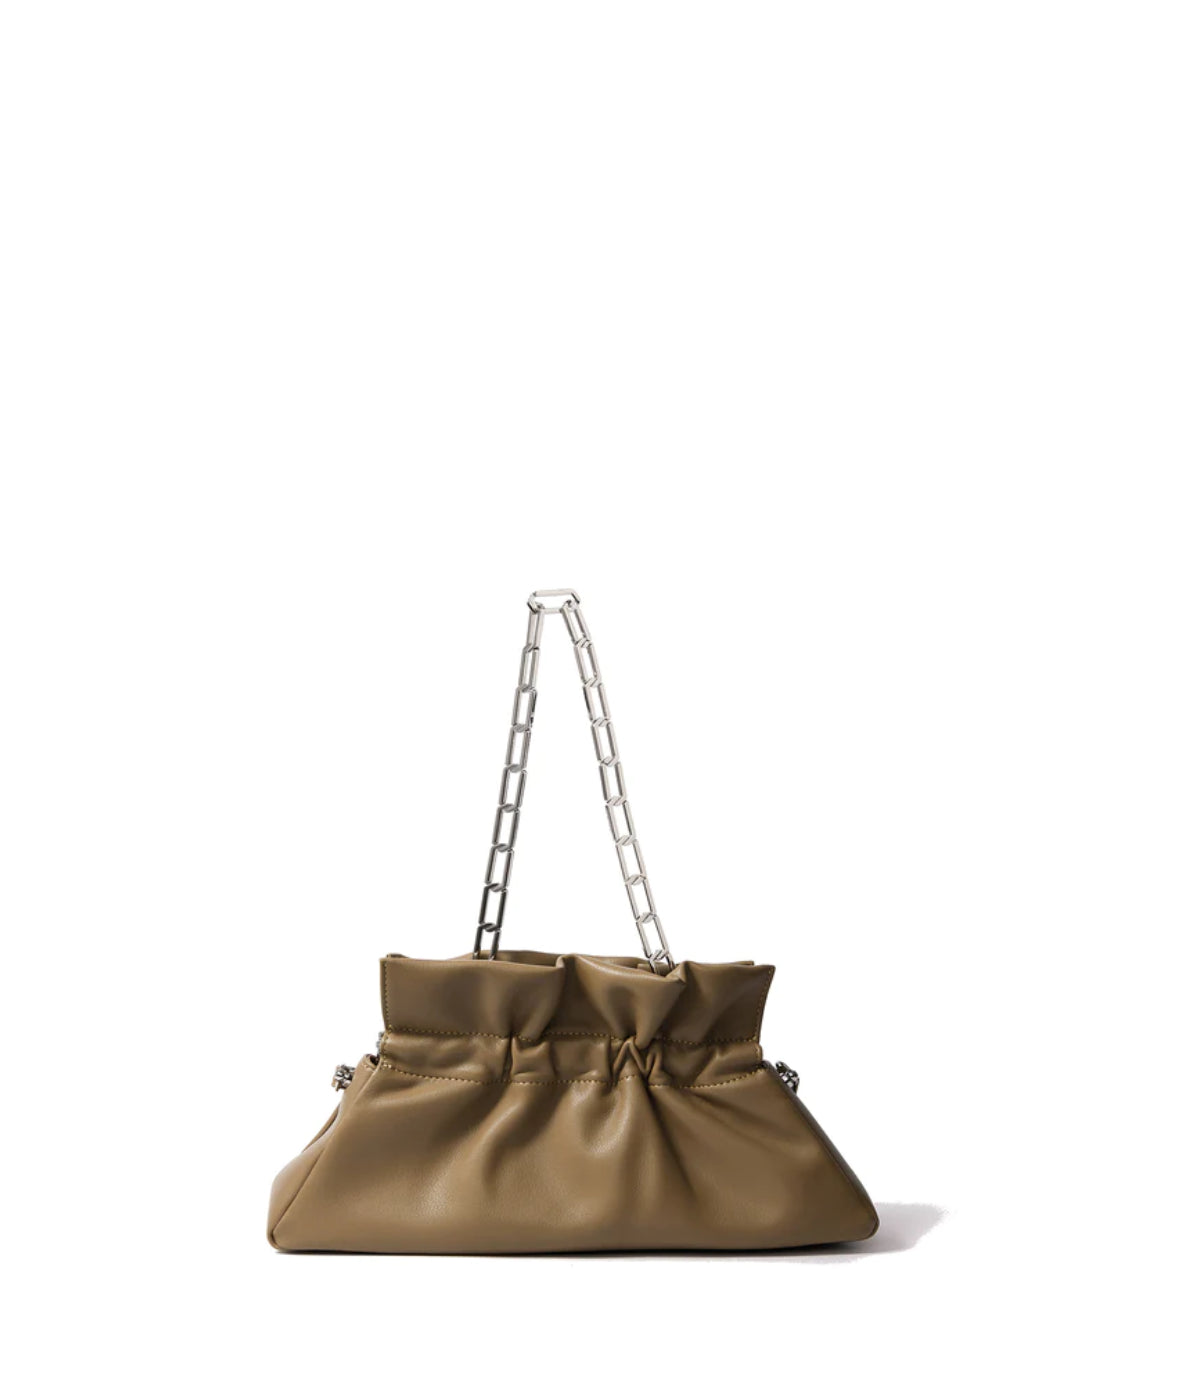 Mila Bag in Smooth Leather Mustard Green